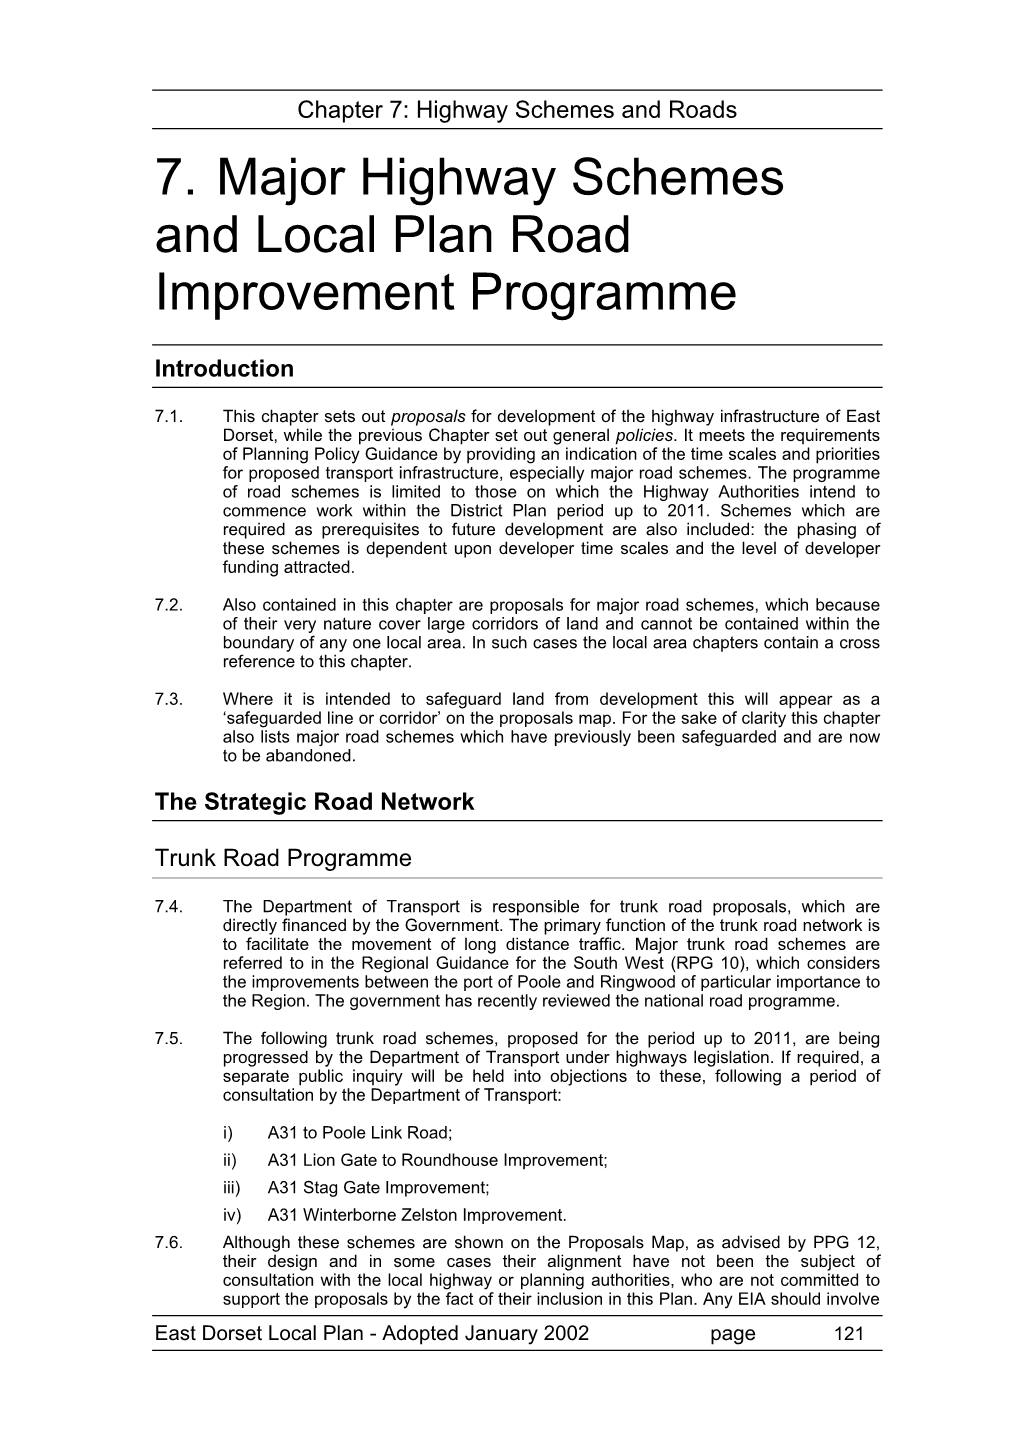 7. Major Highway Schemes and Local Plan Road Improvement Programme